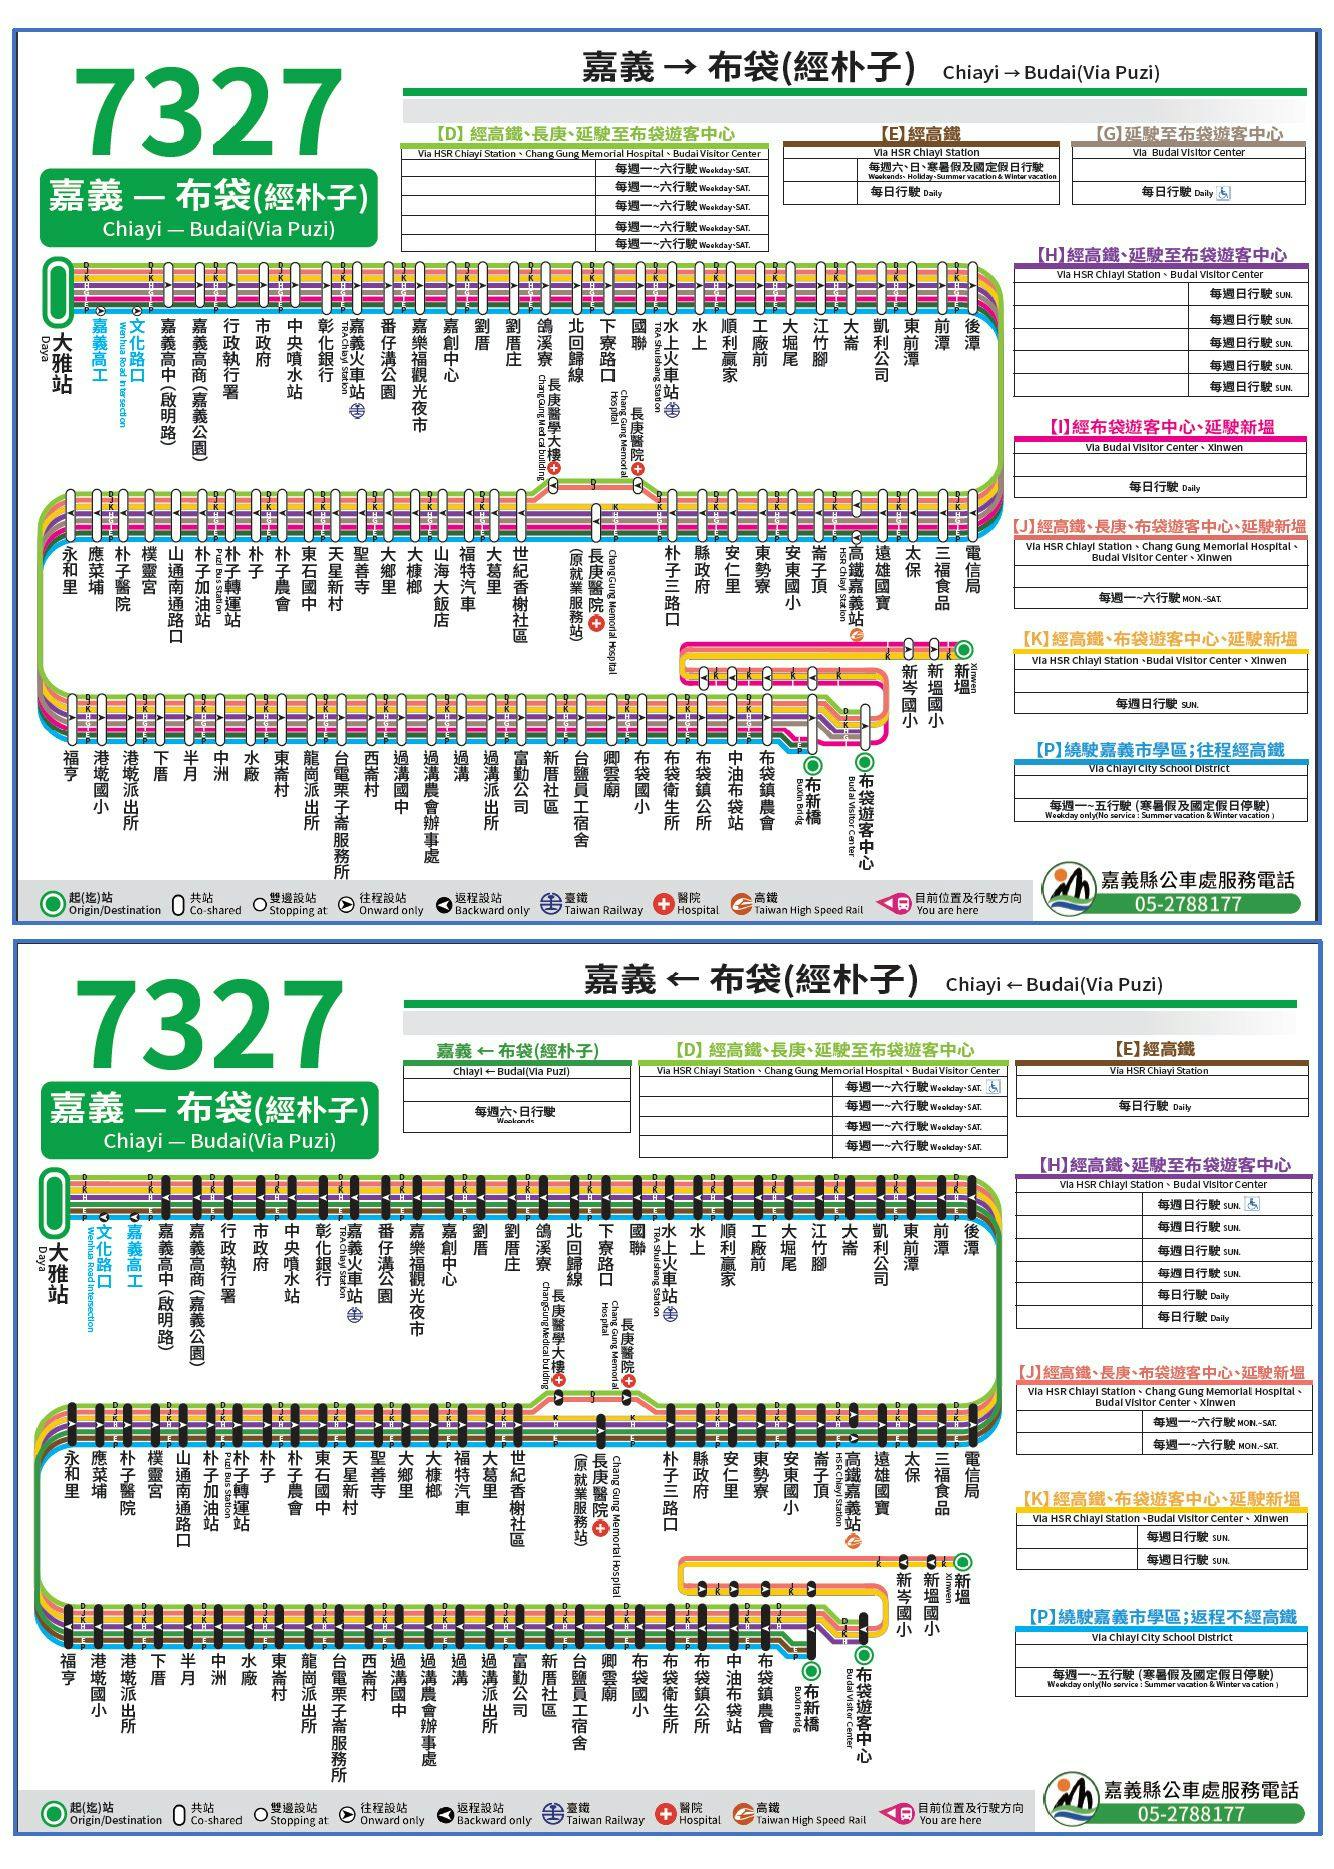 7327Route Map-Chiayi County Bus Service Administration